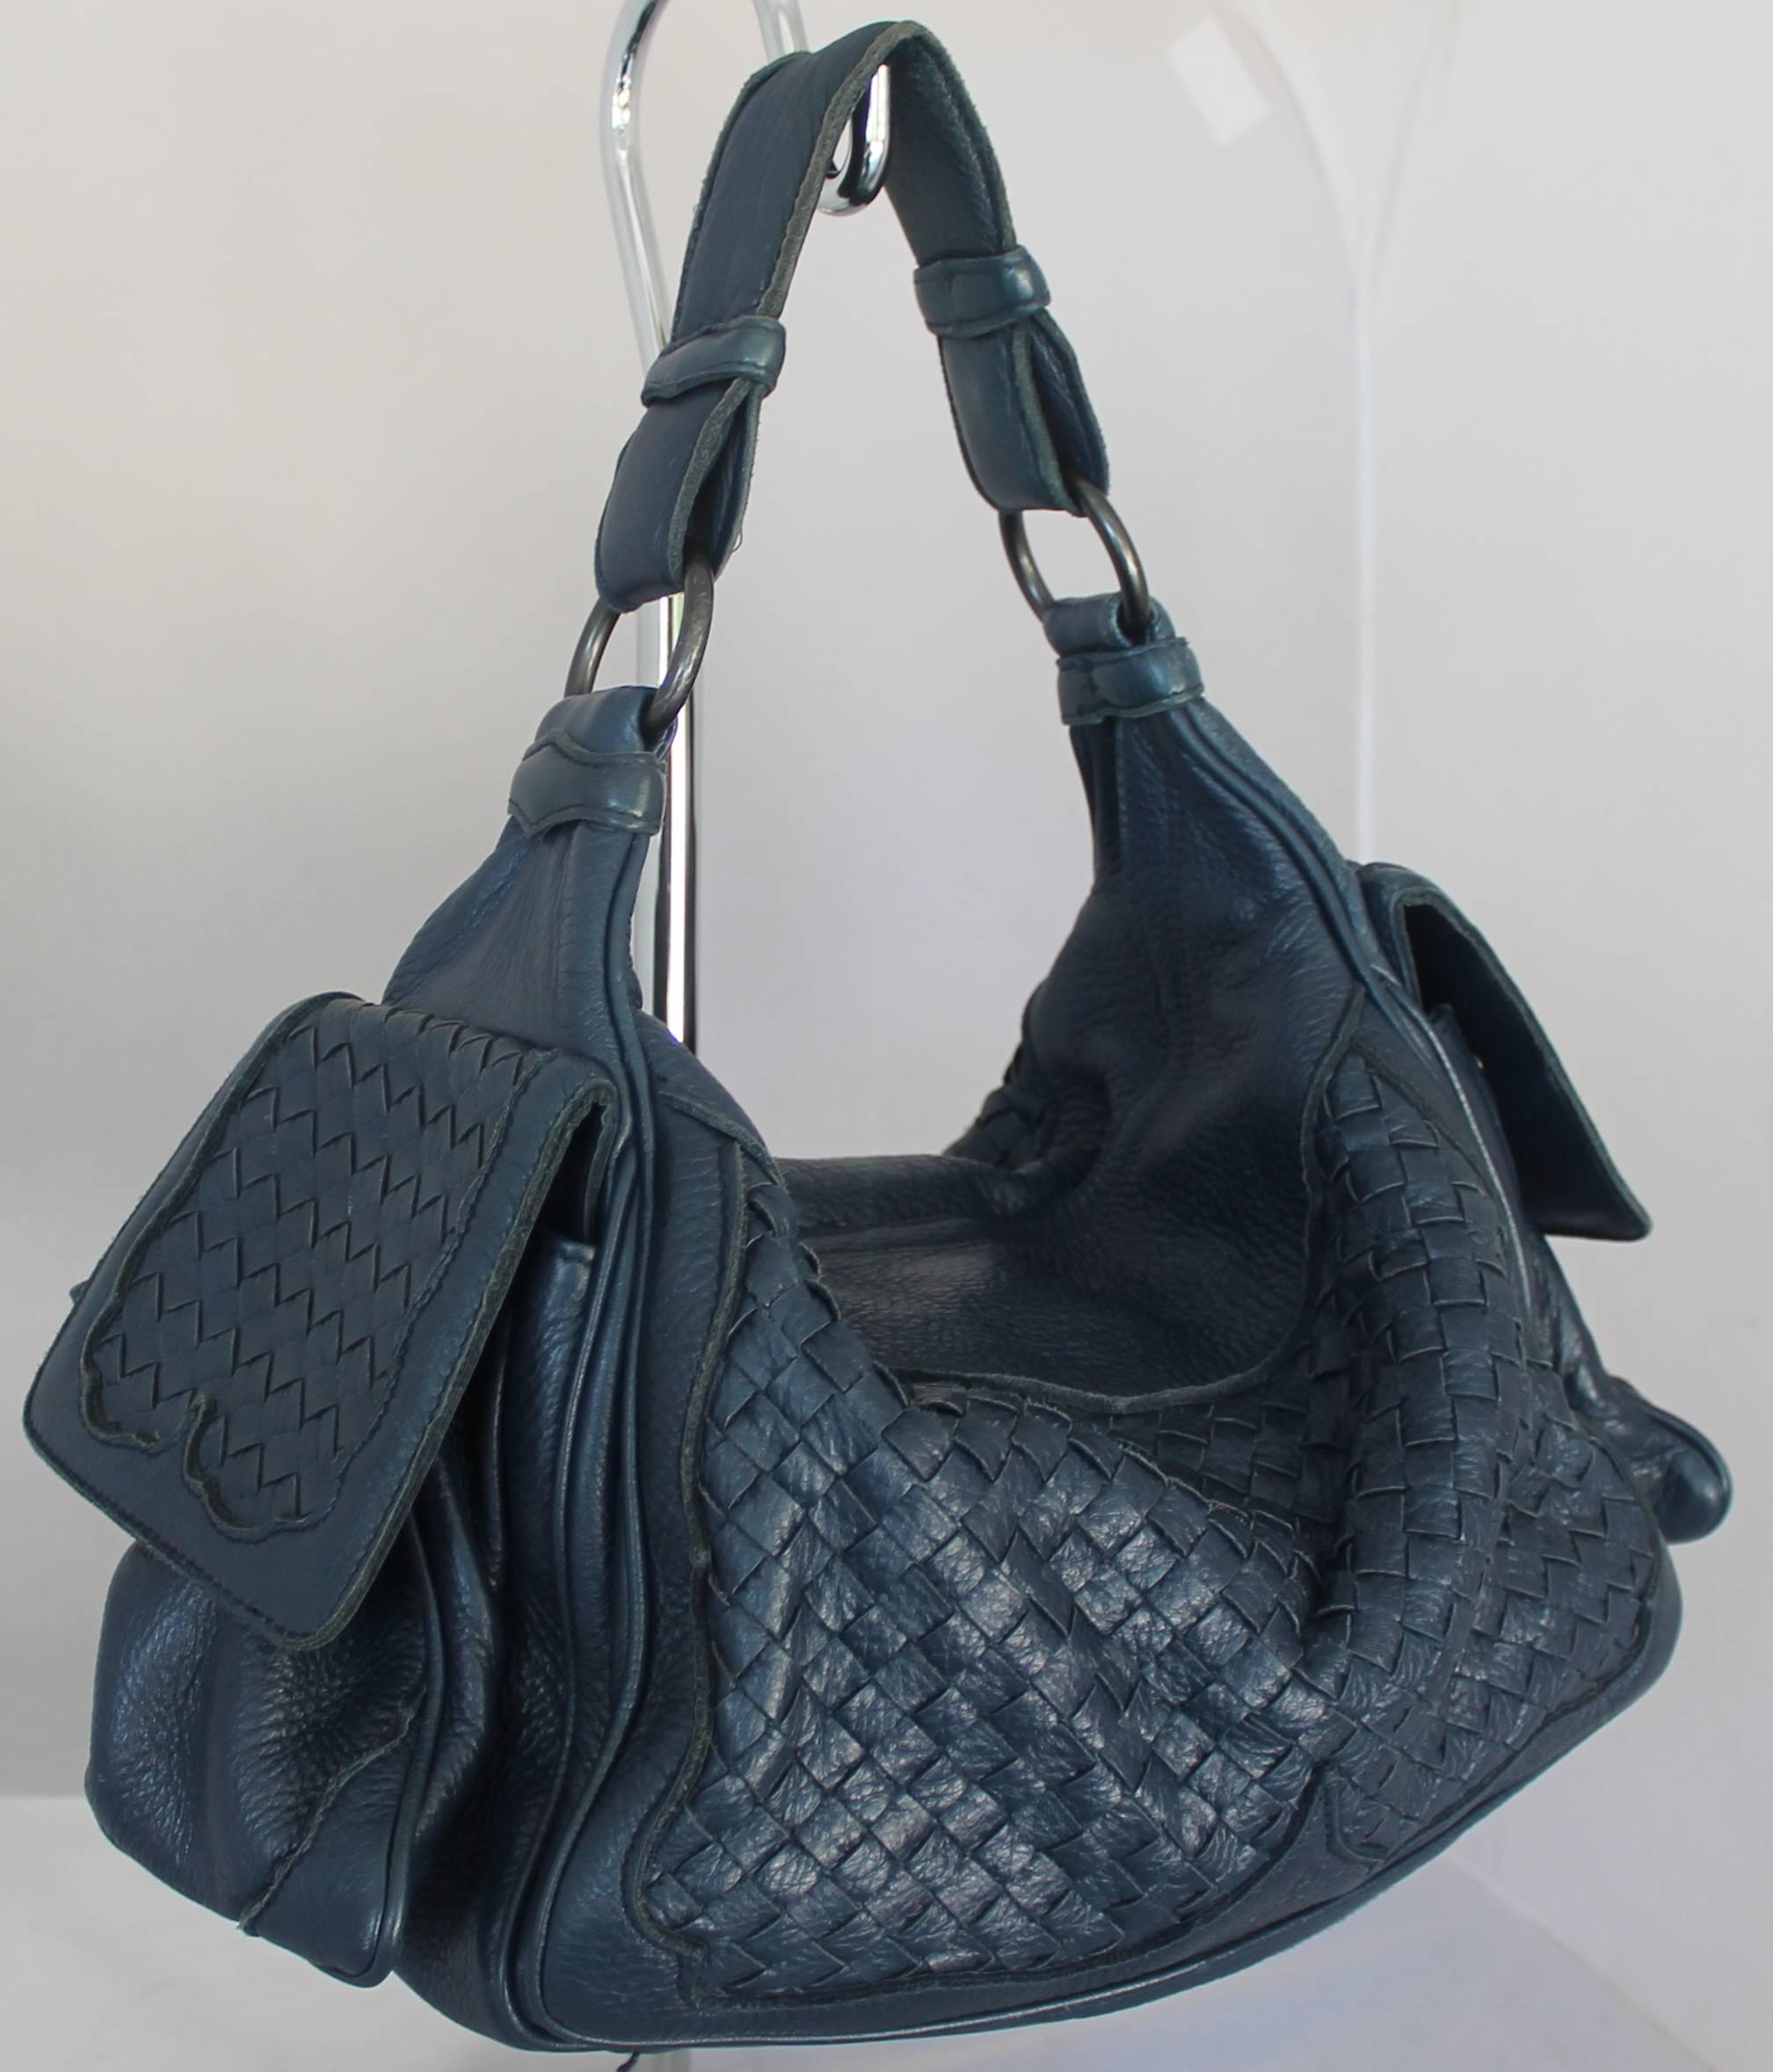 Bottega Veneta Navy Woven Leather Large Shoulder Bag .  This bag is in fair condition with some wear on the handle, inside line, and the leather in general.  It comes with a duster and it features two side pockets on the outside as well as a